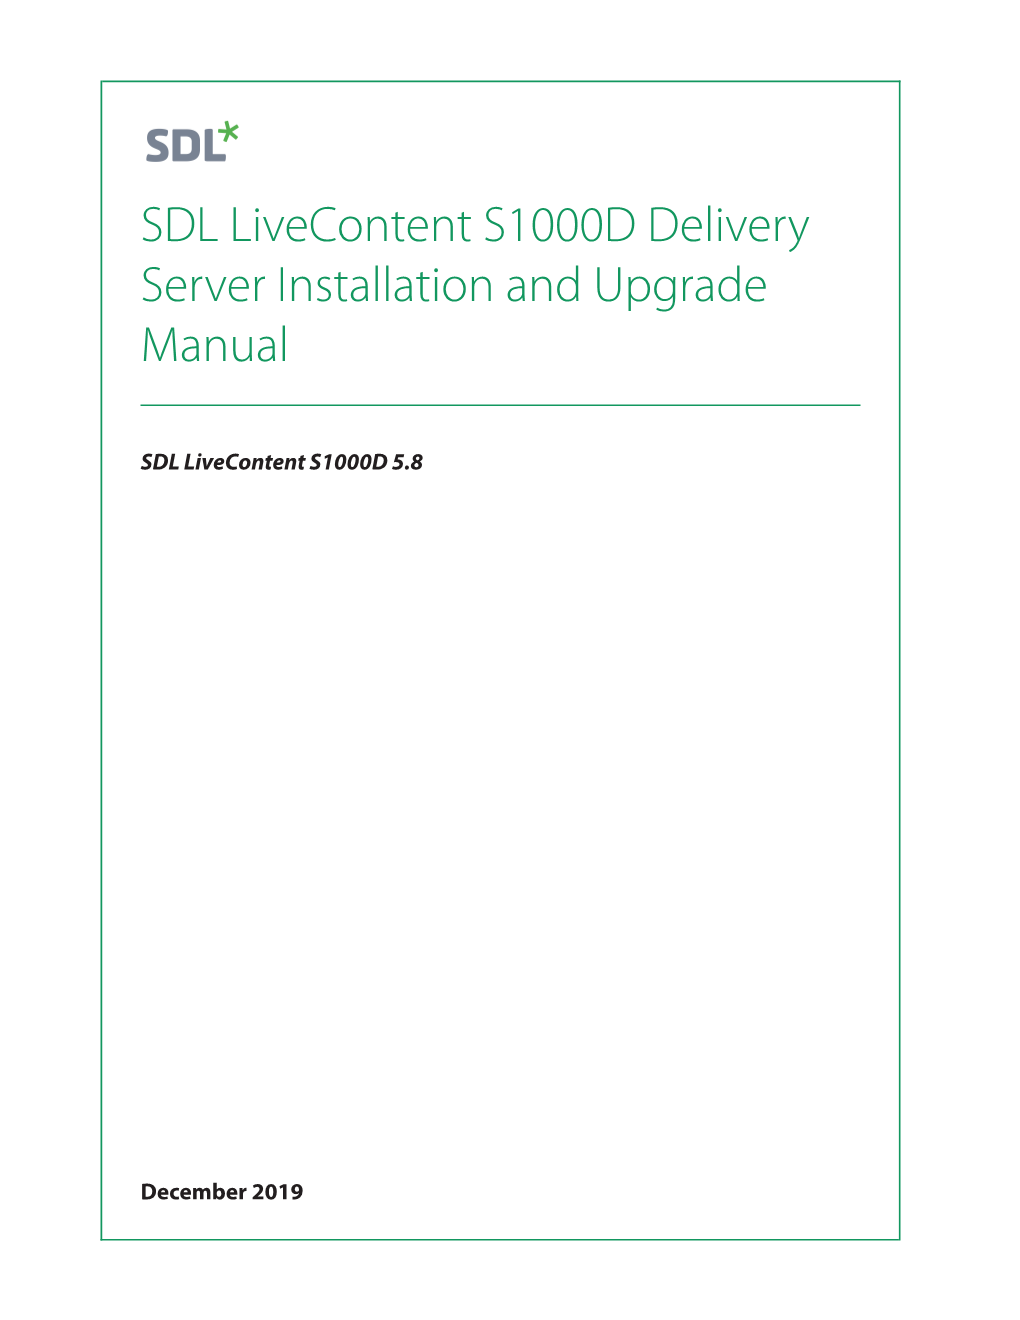 SDL Livecontent S1000D Delivery Server Installation and Upgrade Manual